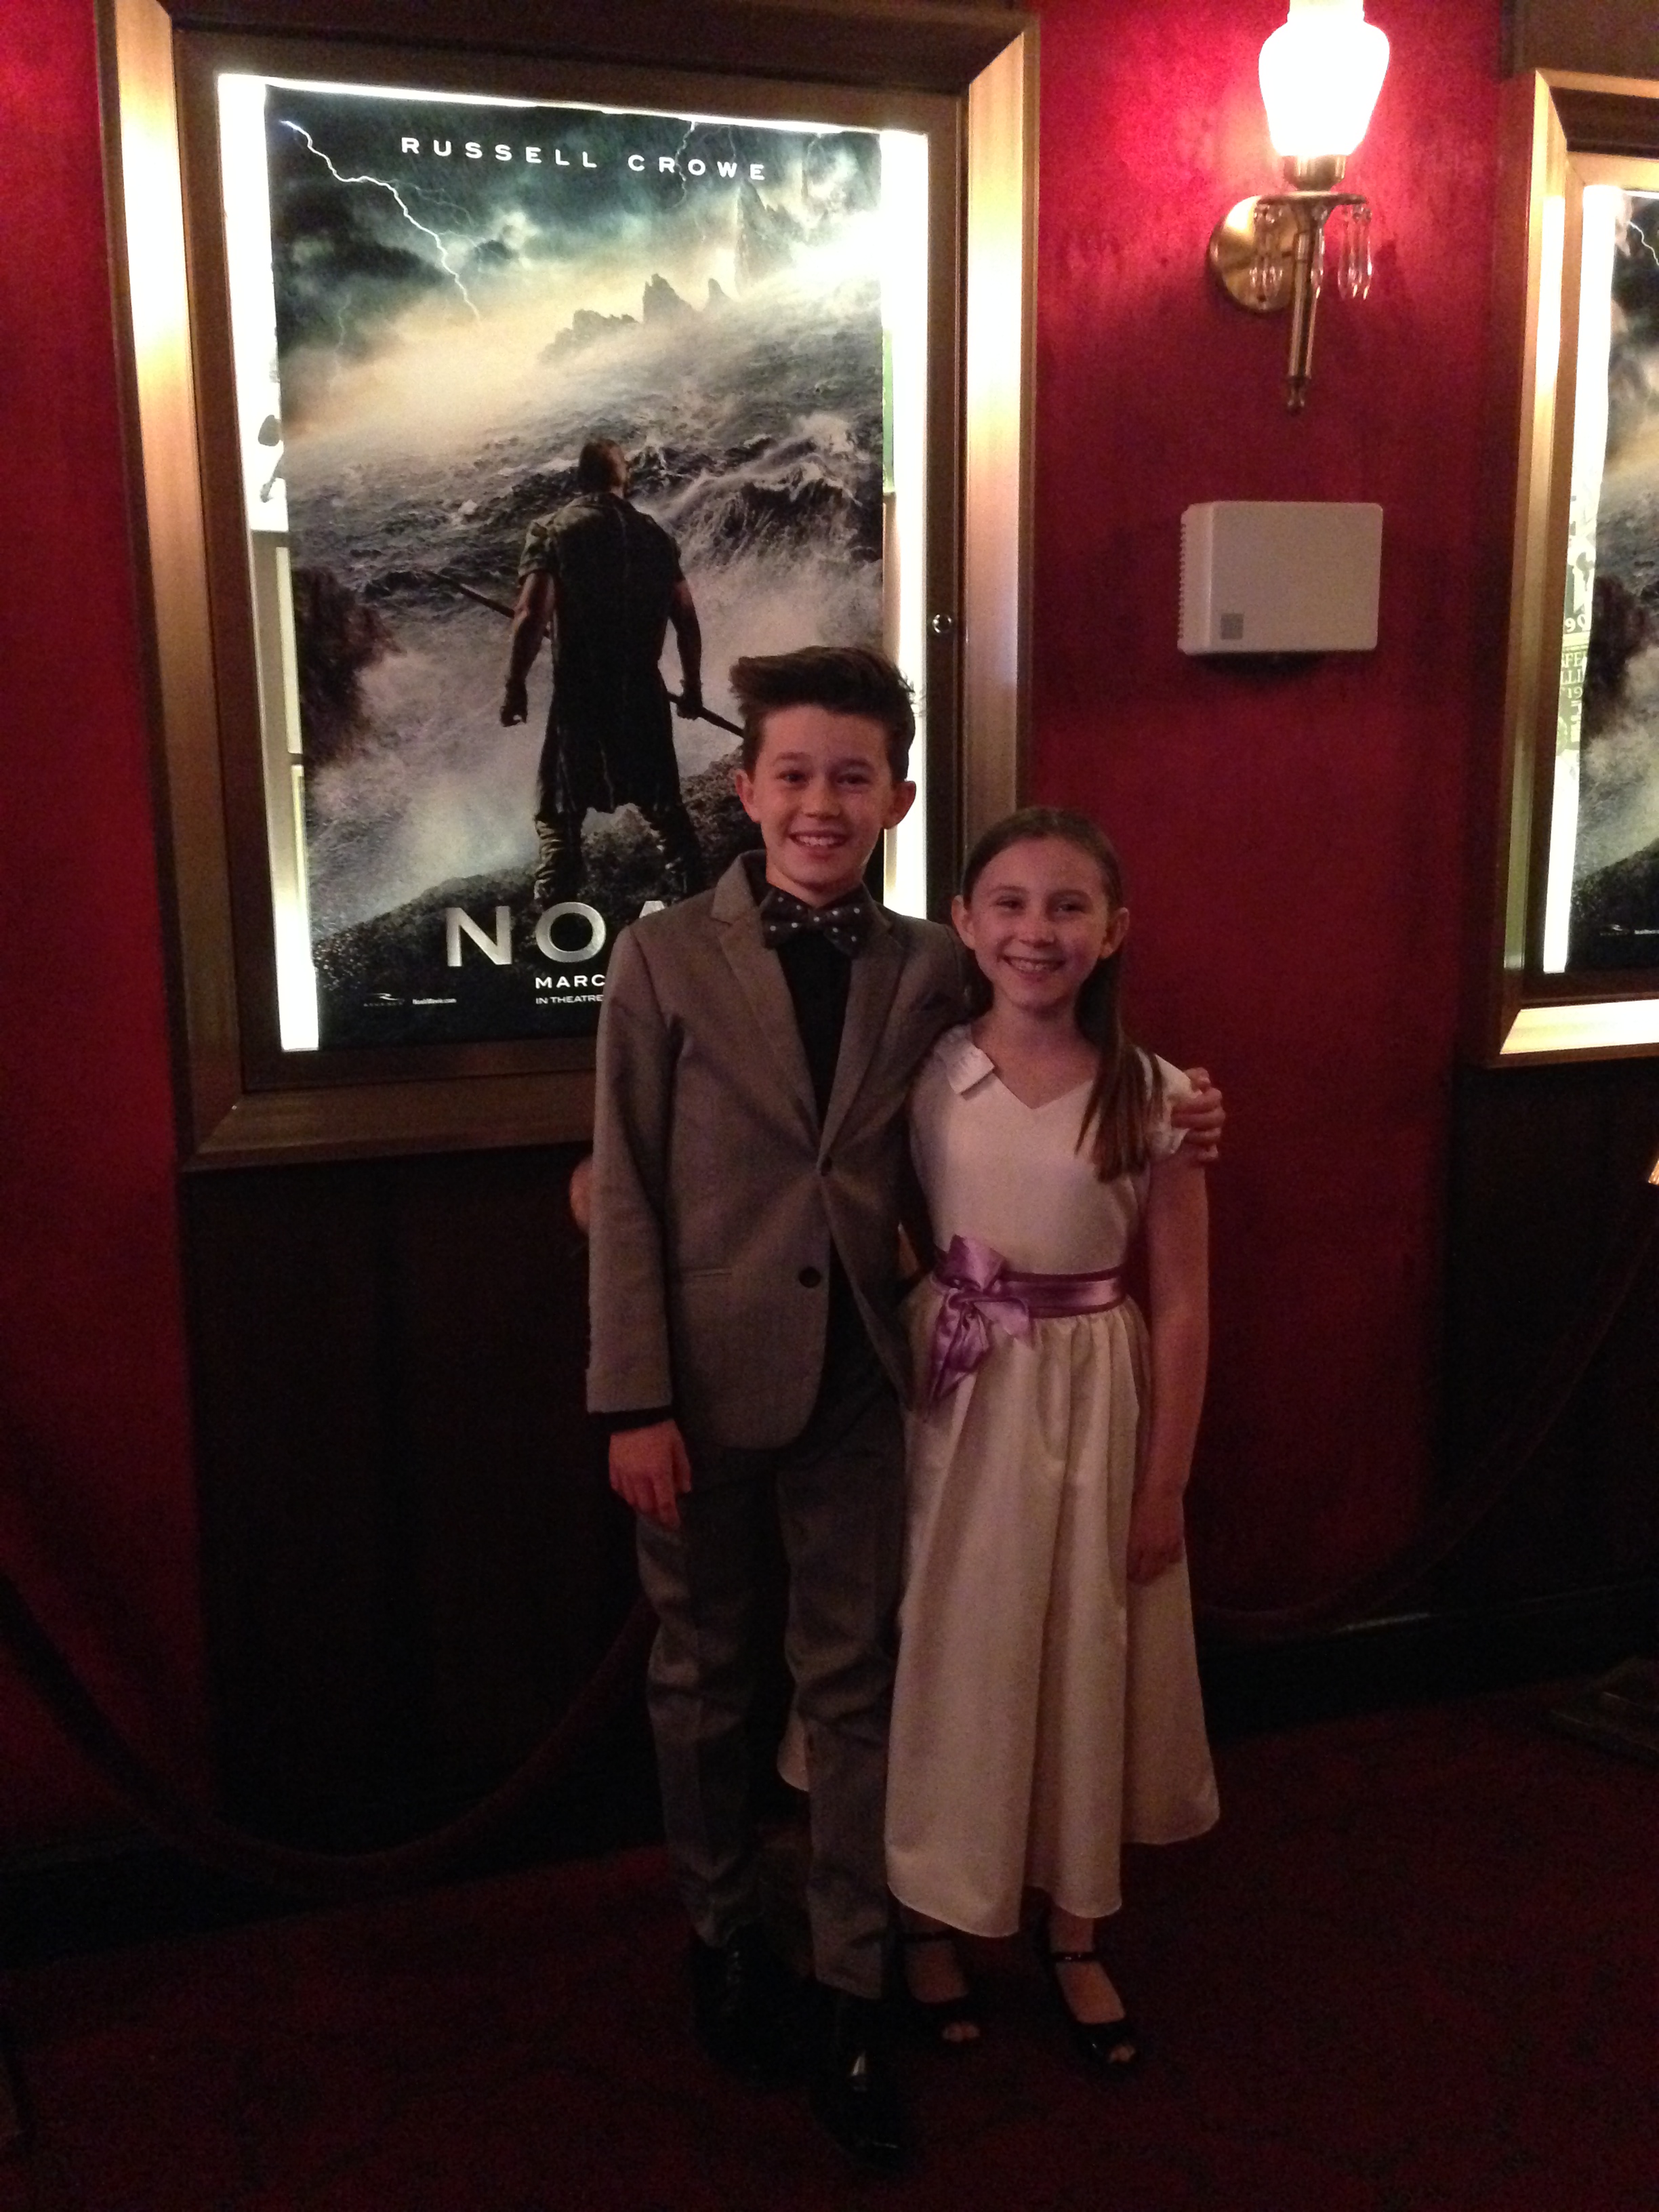 Me and my sister Elise at the Premiere of Noah in NYC